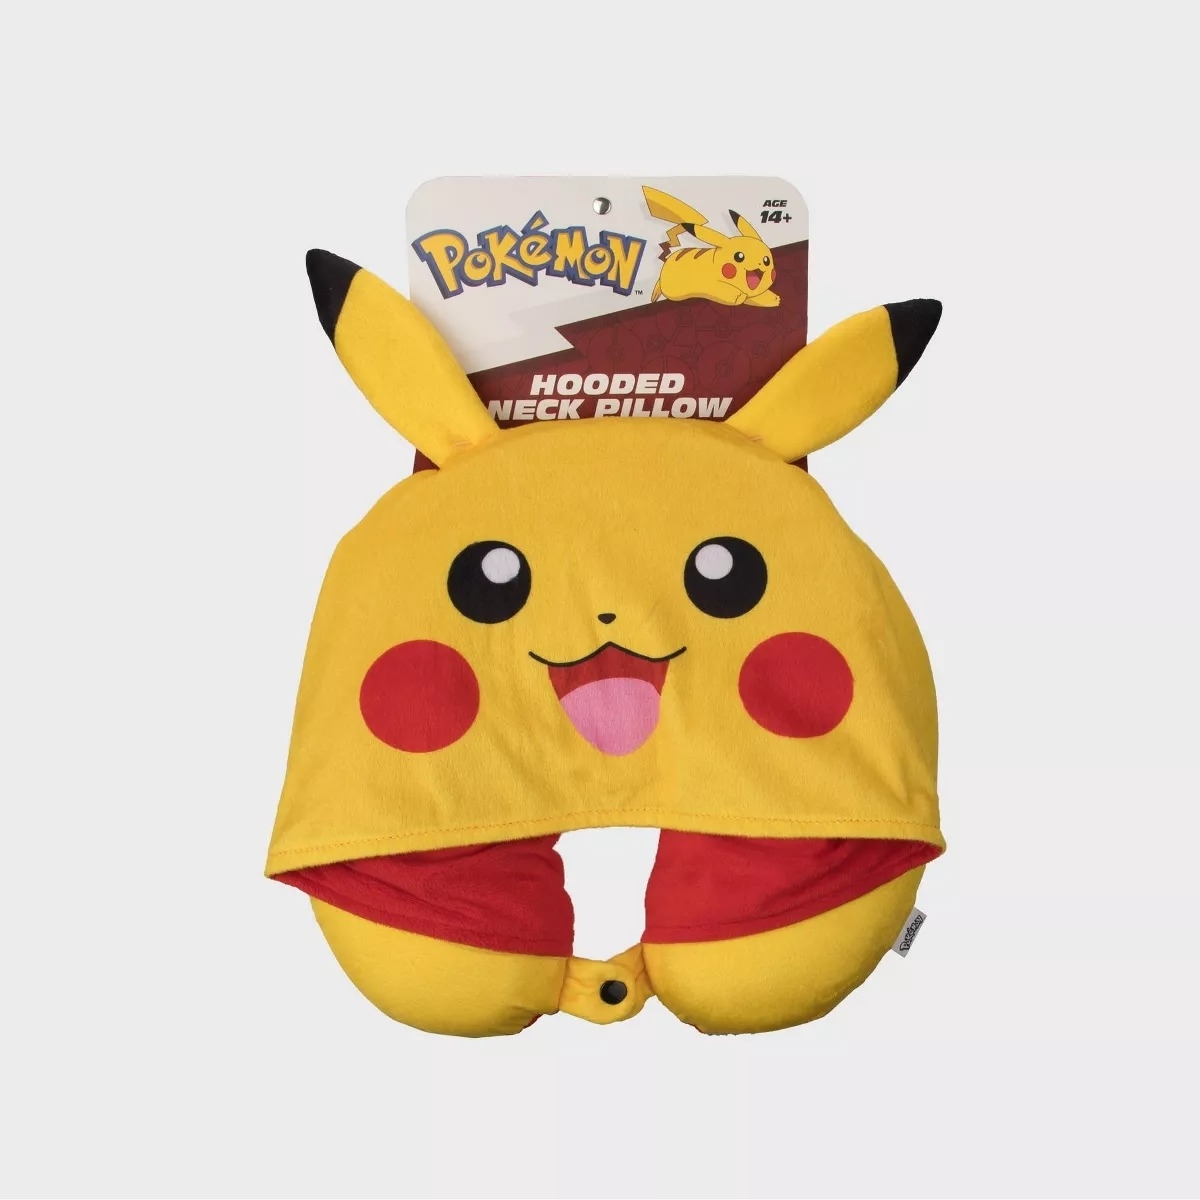 Pikachu-themed hooded neck pillow with character features, for travel comfort